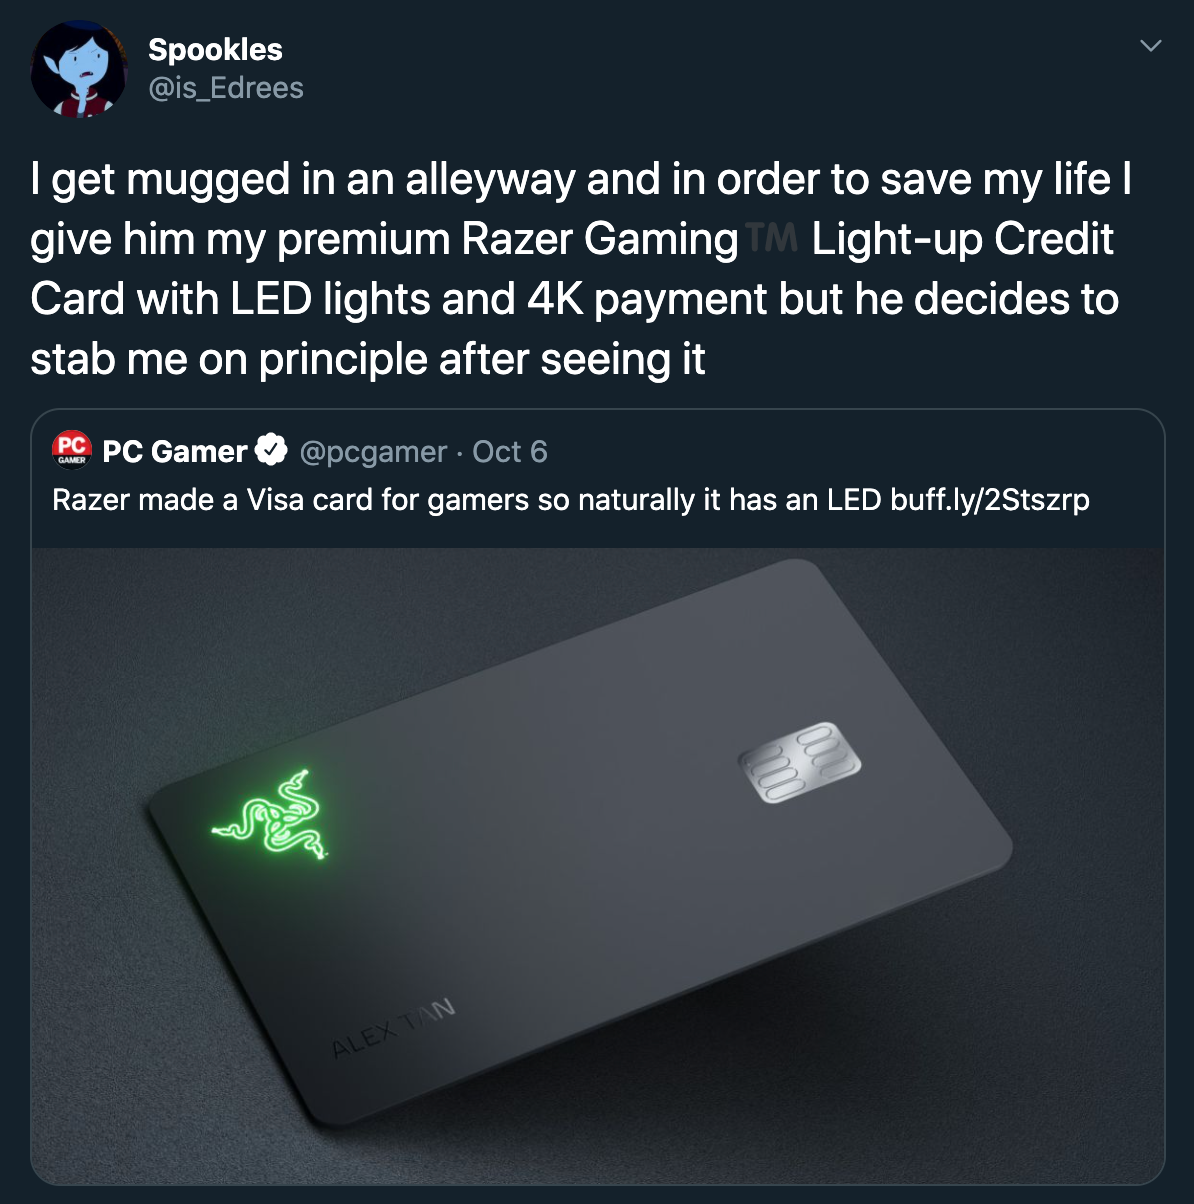 razer gamer credit card reactions - I get mugged in an alleyway and in order to save my life give him my premium Razer Gaming Lightup Credit Card with Led lights and 4K payment but he decides to stab me on principle after seeing it